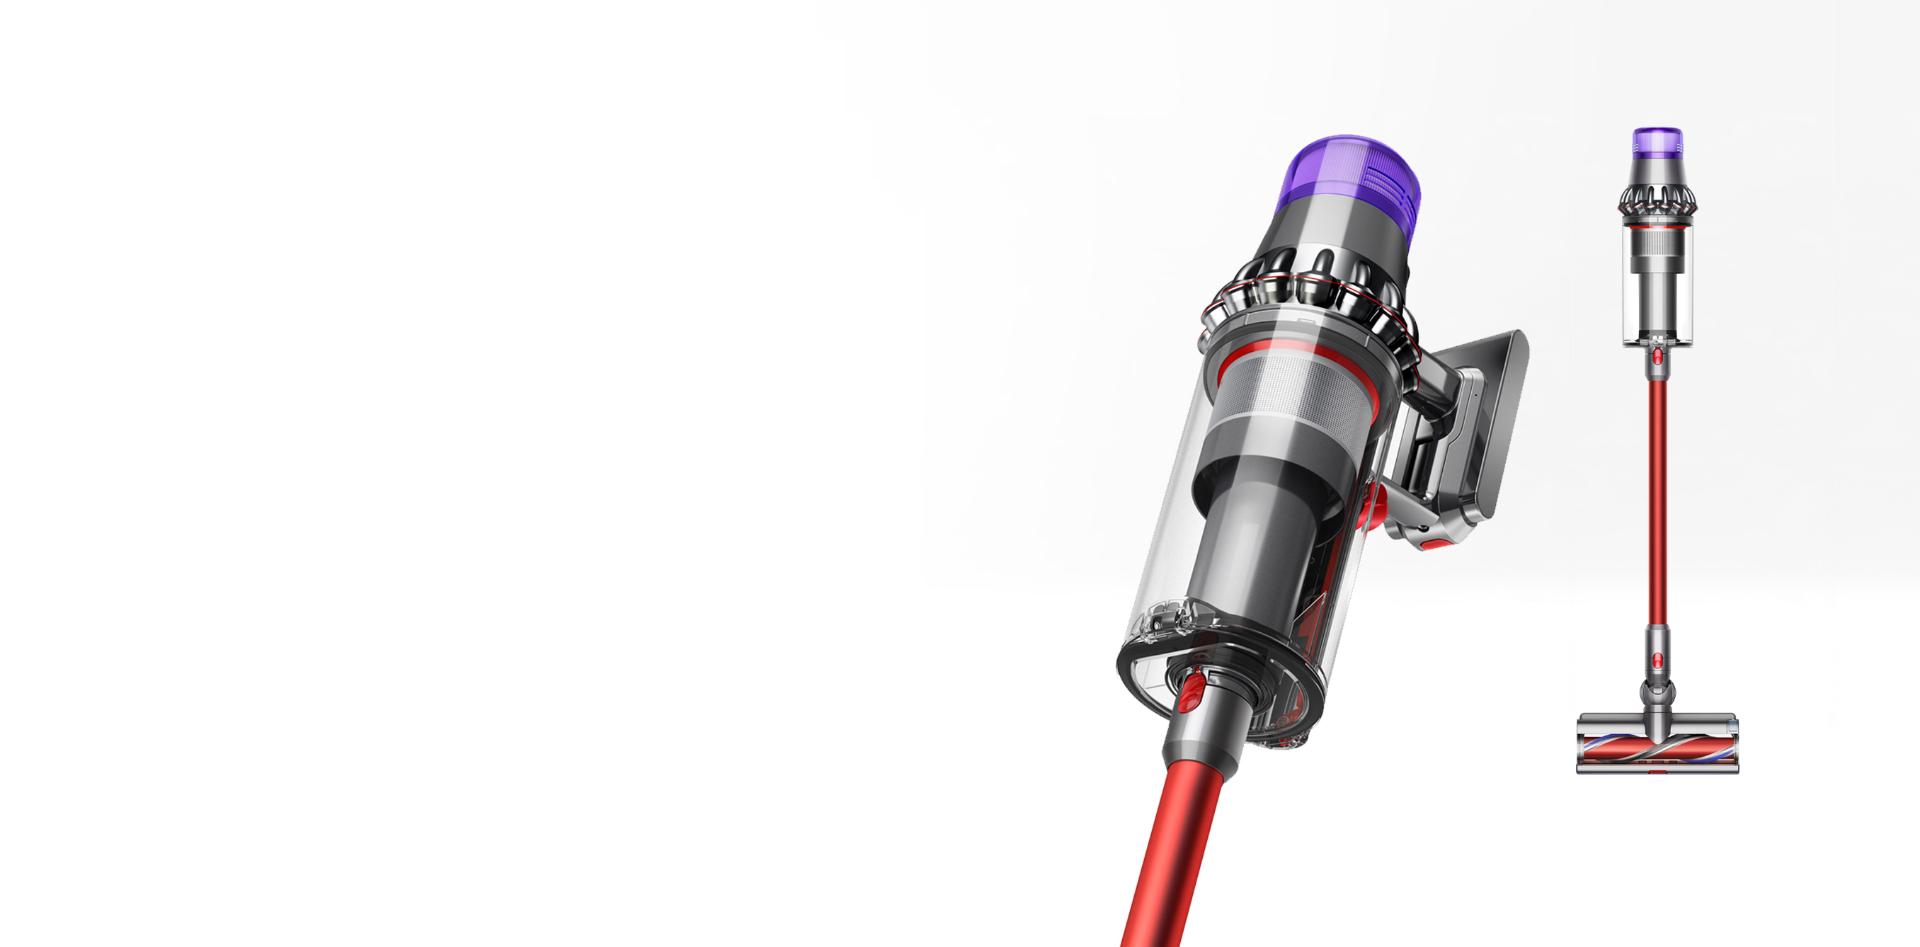 Dyson Outsize vacuum shown in both full view and close-up.